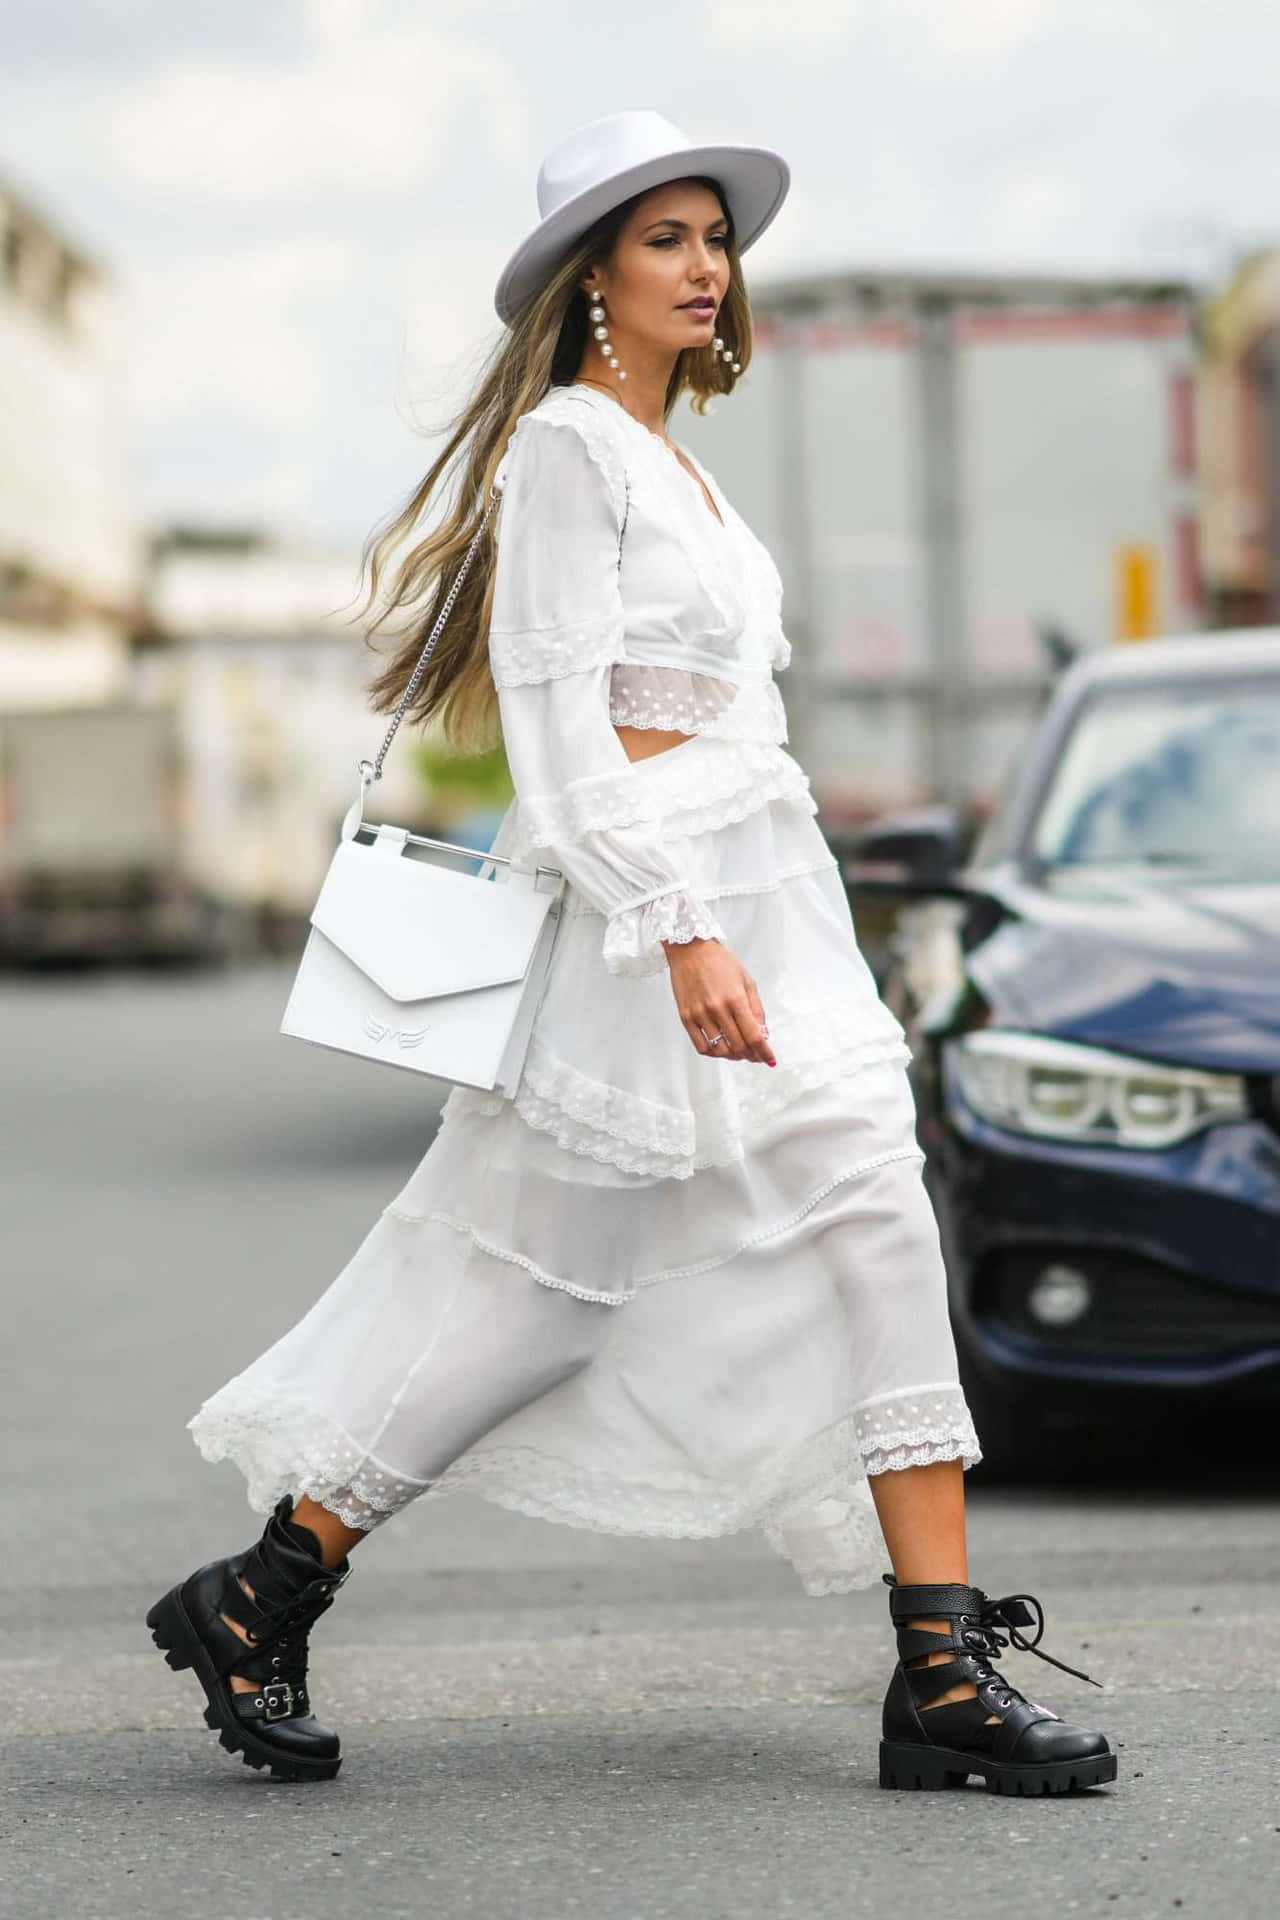 A Woman In A White Dress And Hat Walking Down The Street